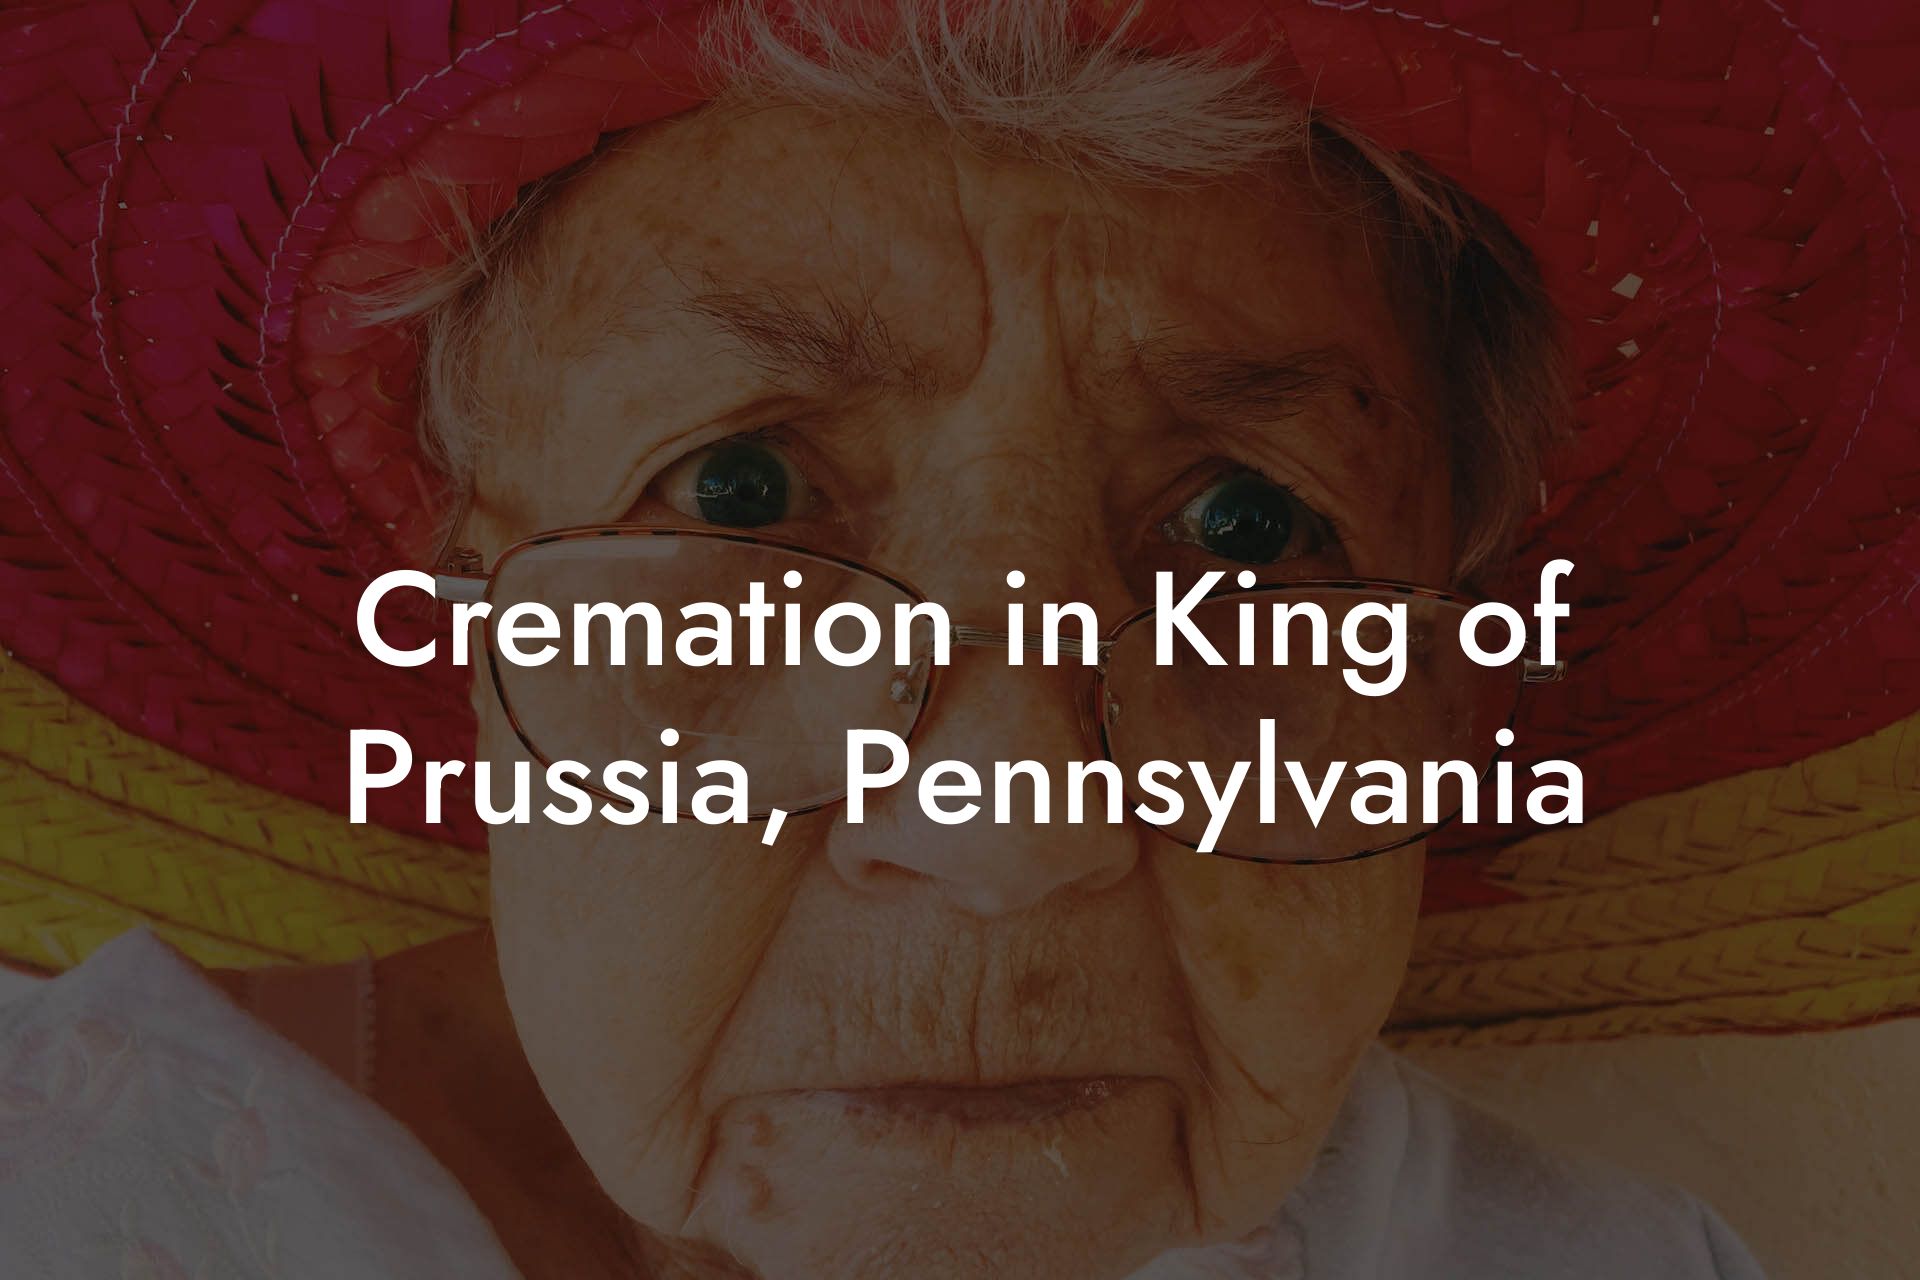 Cremation in King of Prussia, Pennsylvania